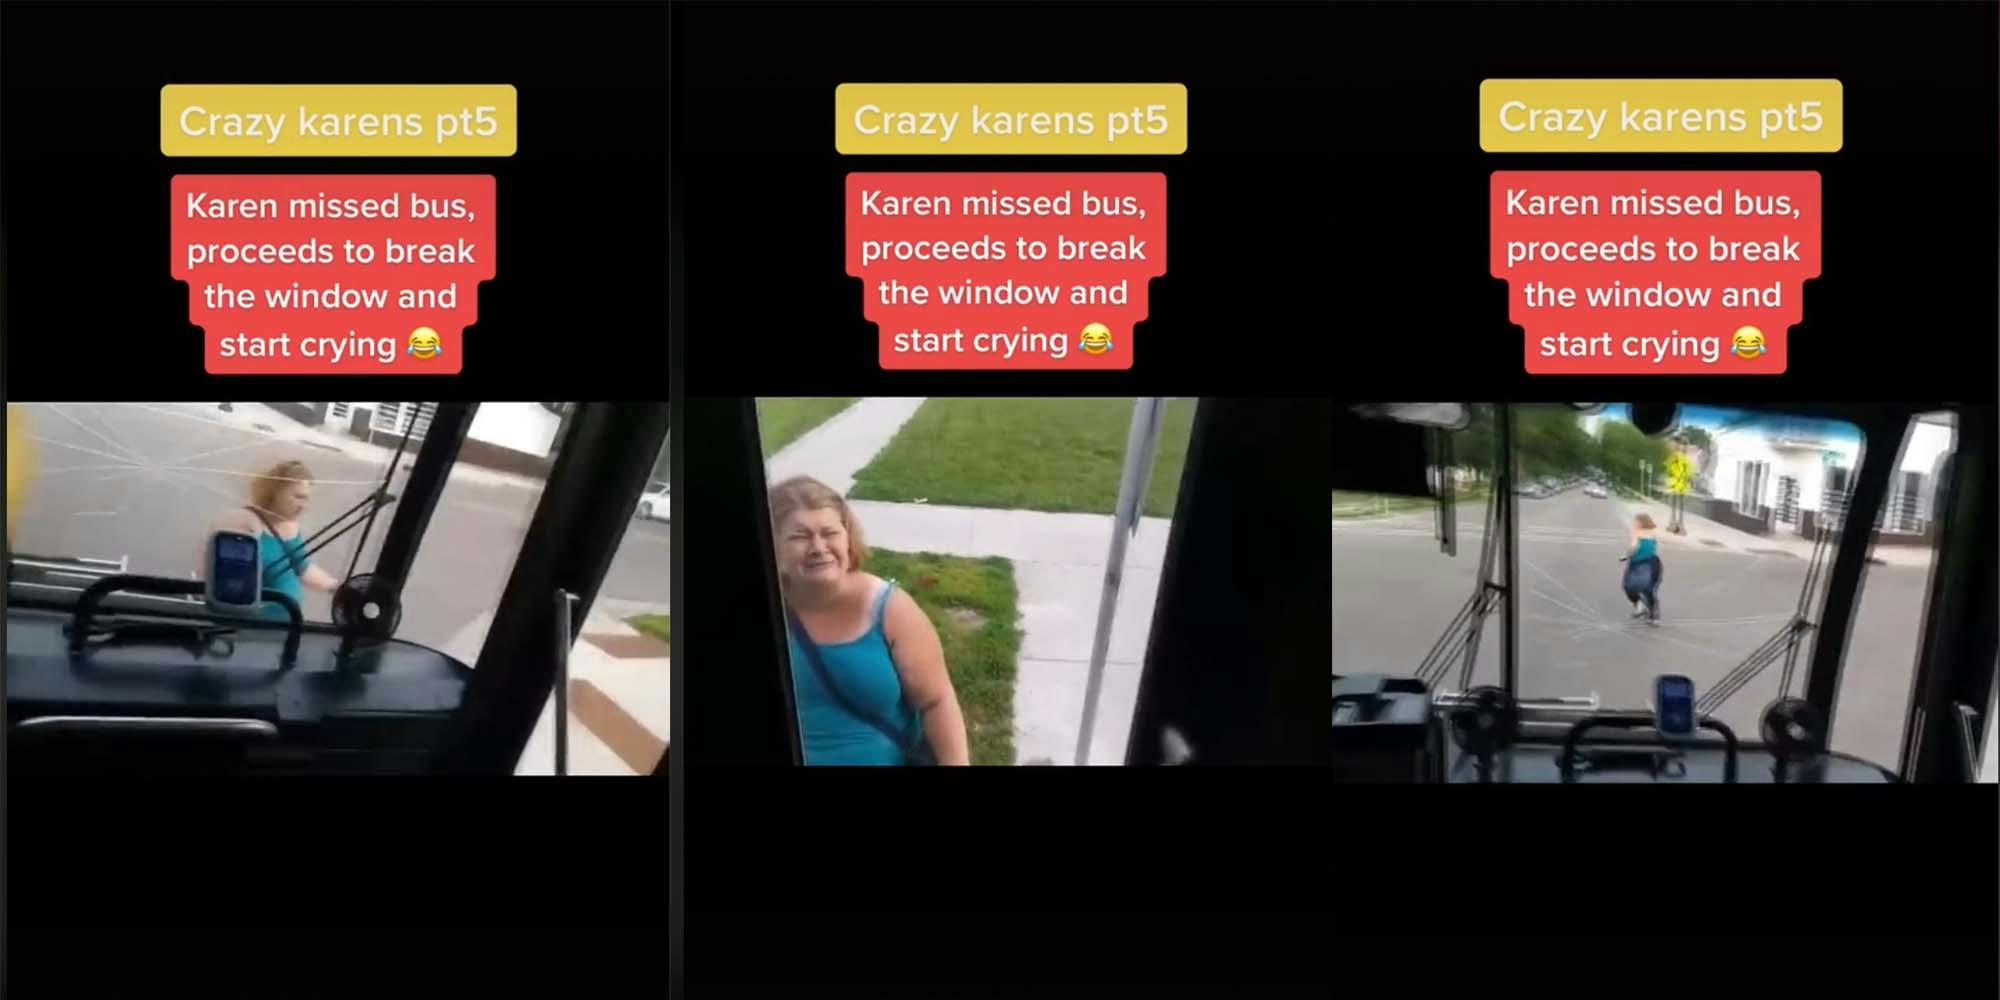 A Karen hits a bus window in response to the driver not letting her on.